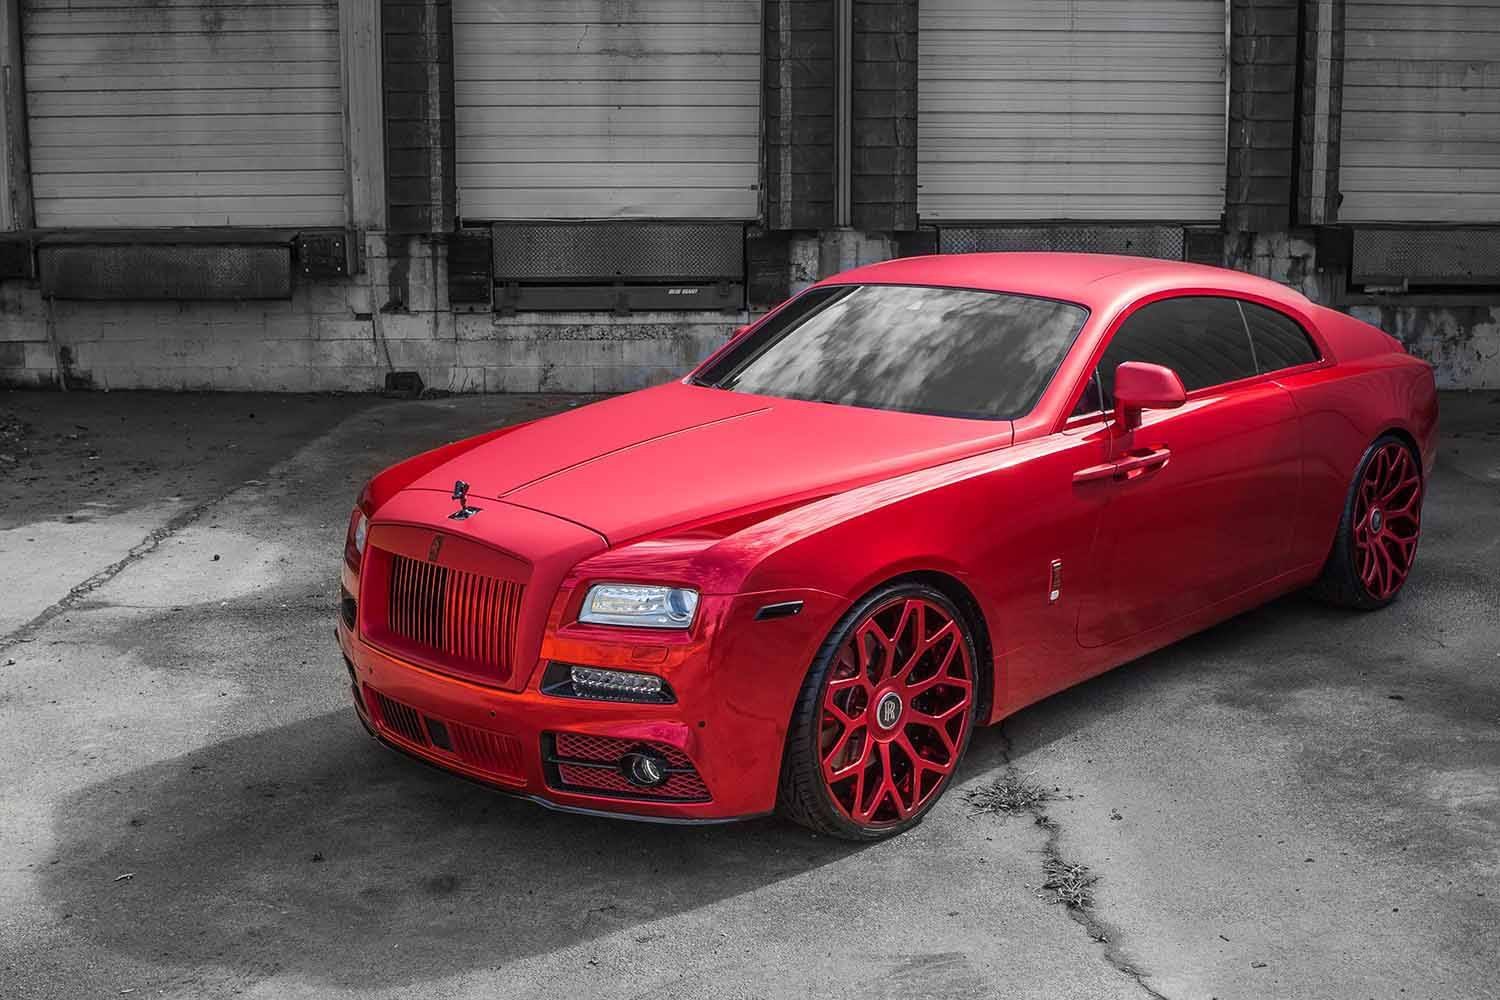 Red On Red Extremely Stylish Rolls Royce Wraith Boasting